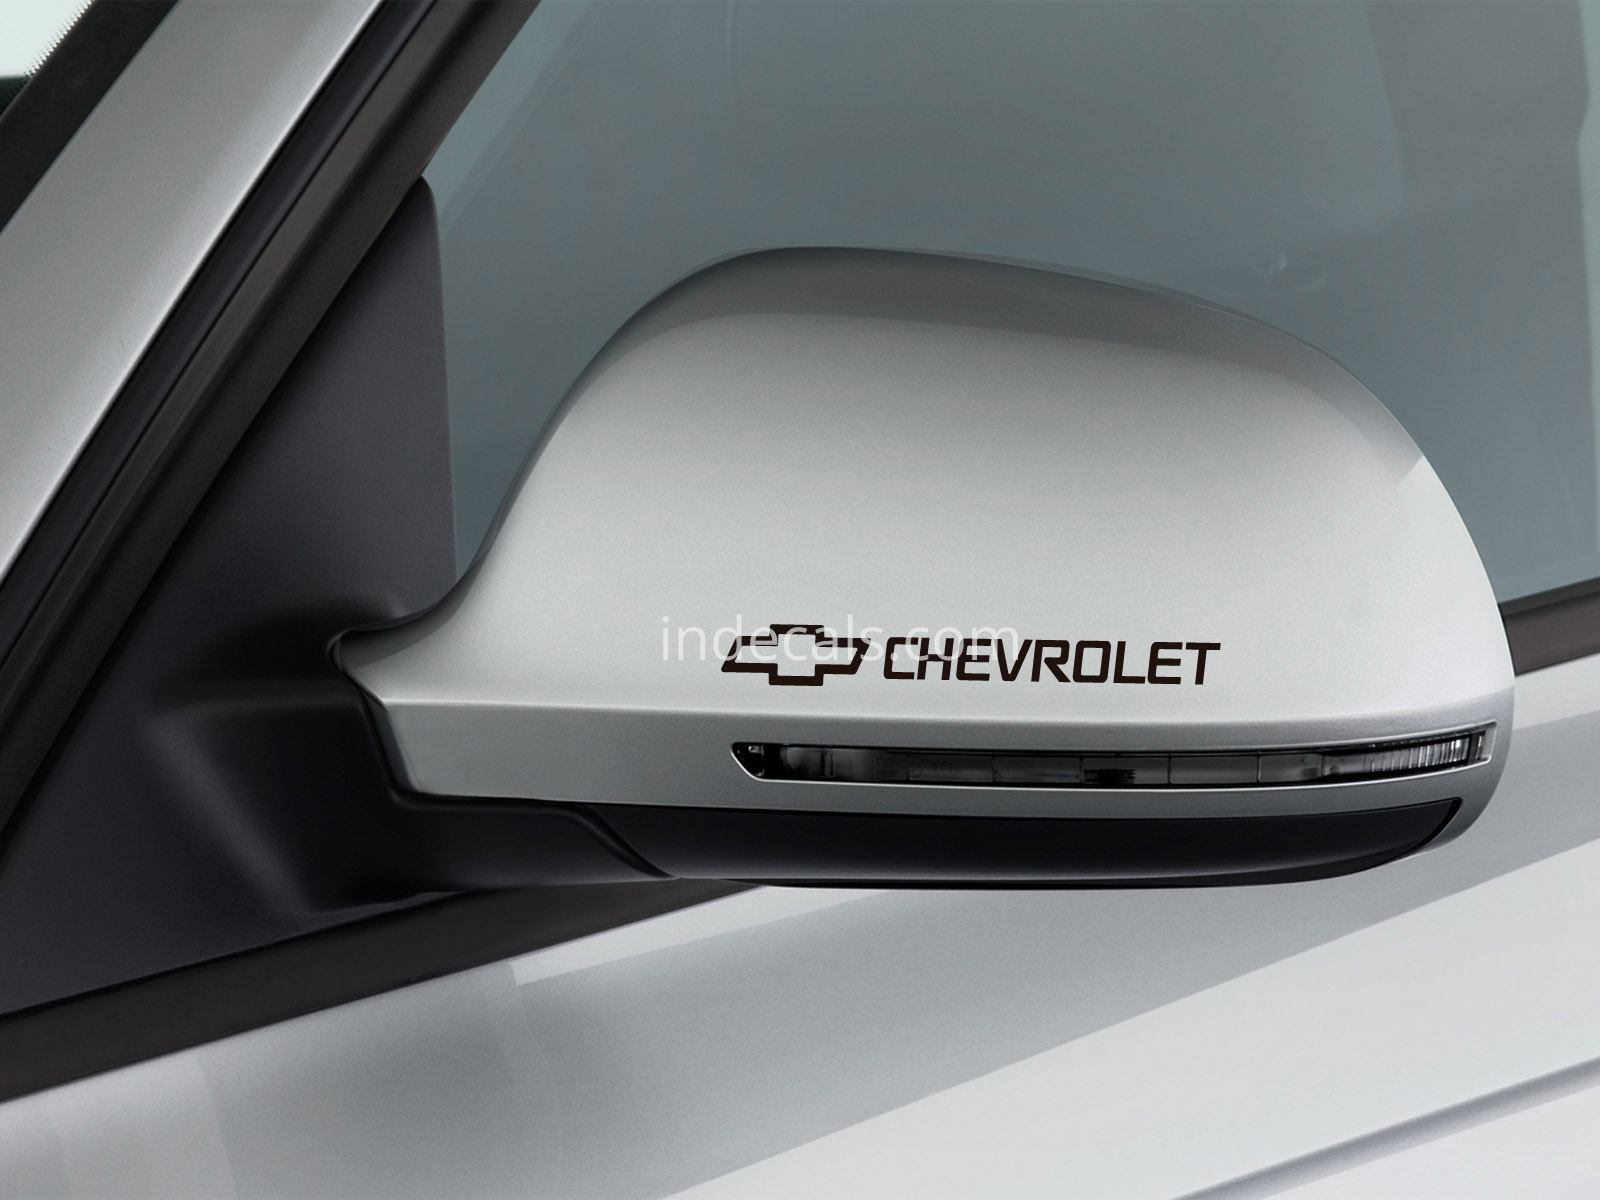 3 x Chevrolet Stickers for Mirrors - Black